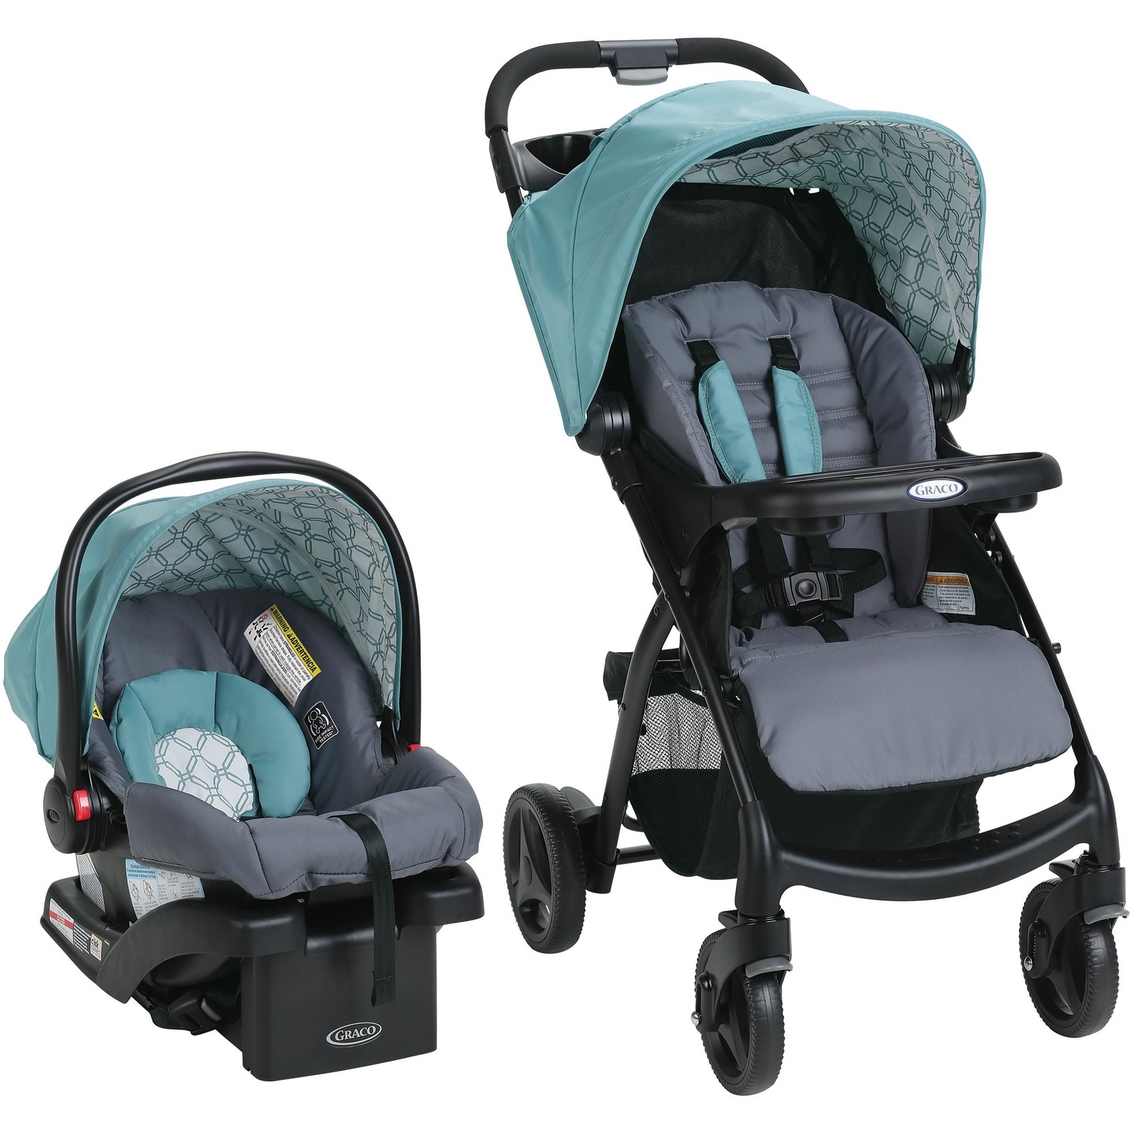 Graco Verb Travel System with Snugride 30 Infant Car Seat - Image 3 of 3